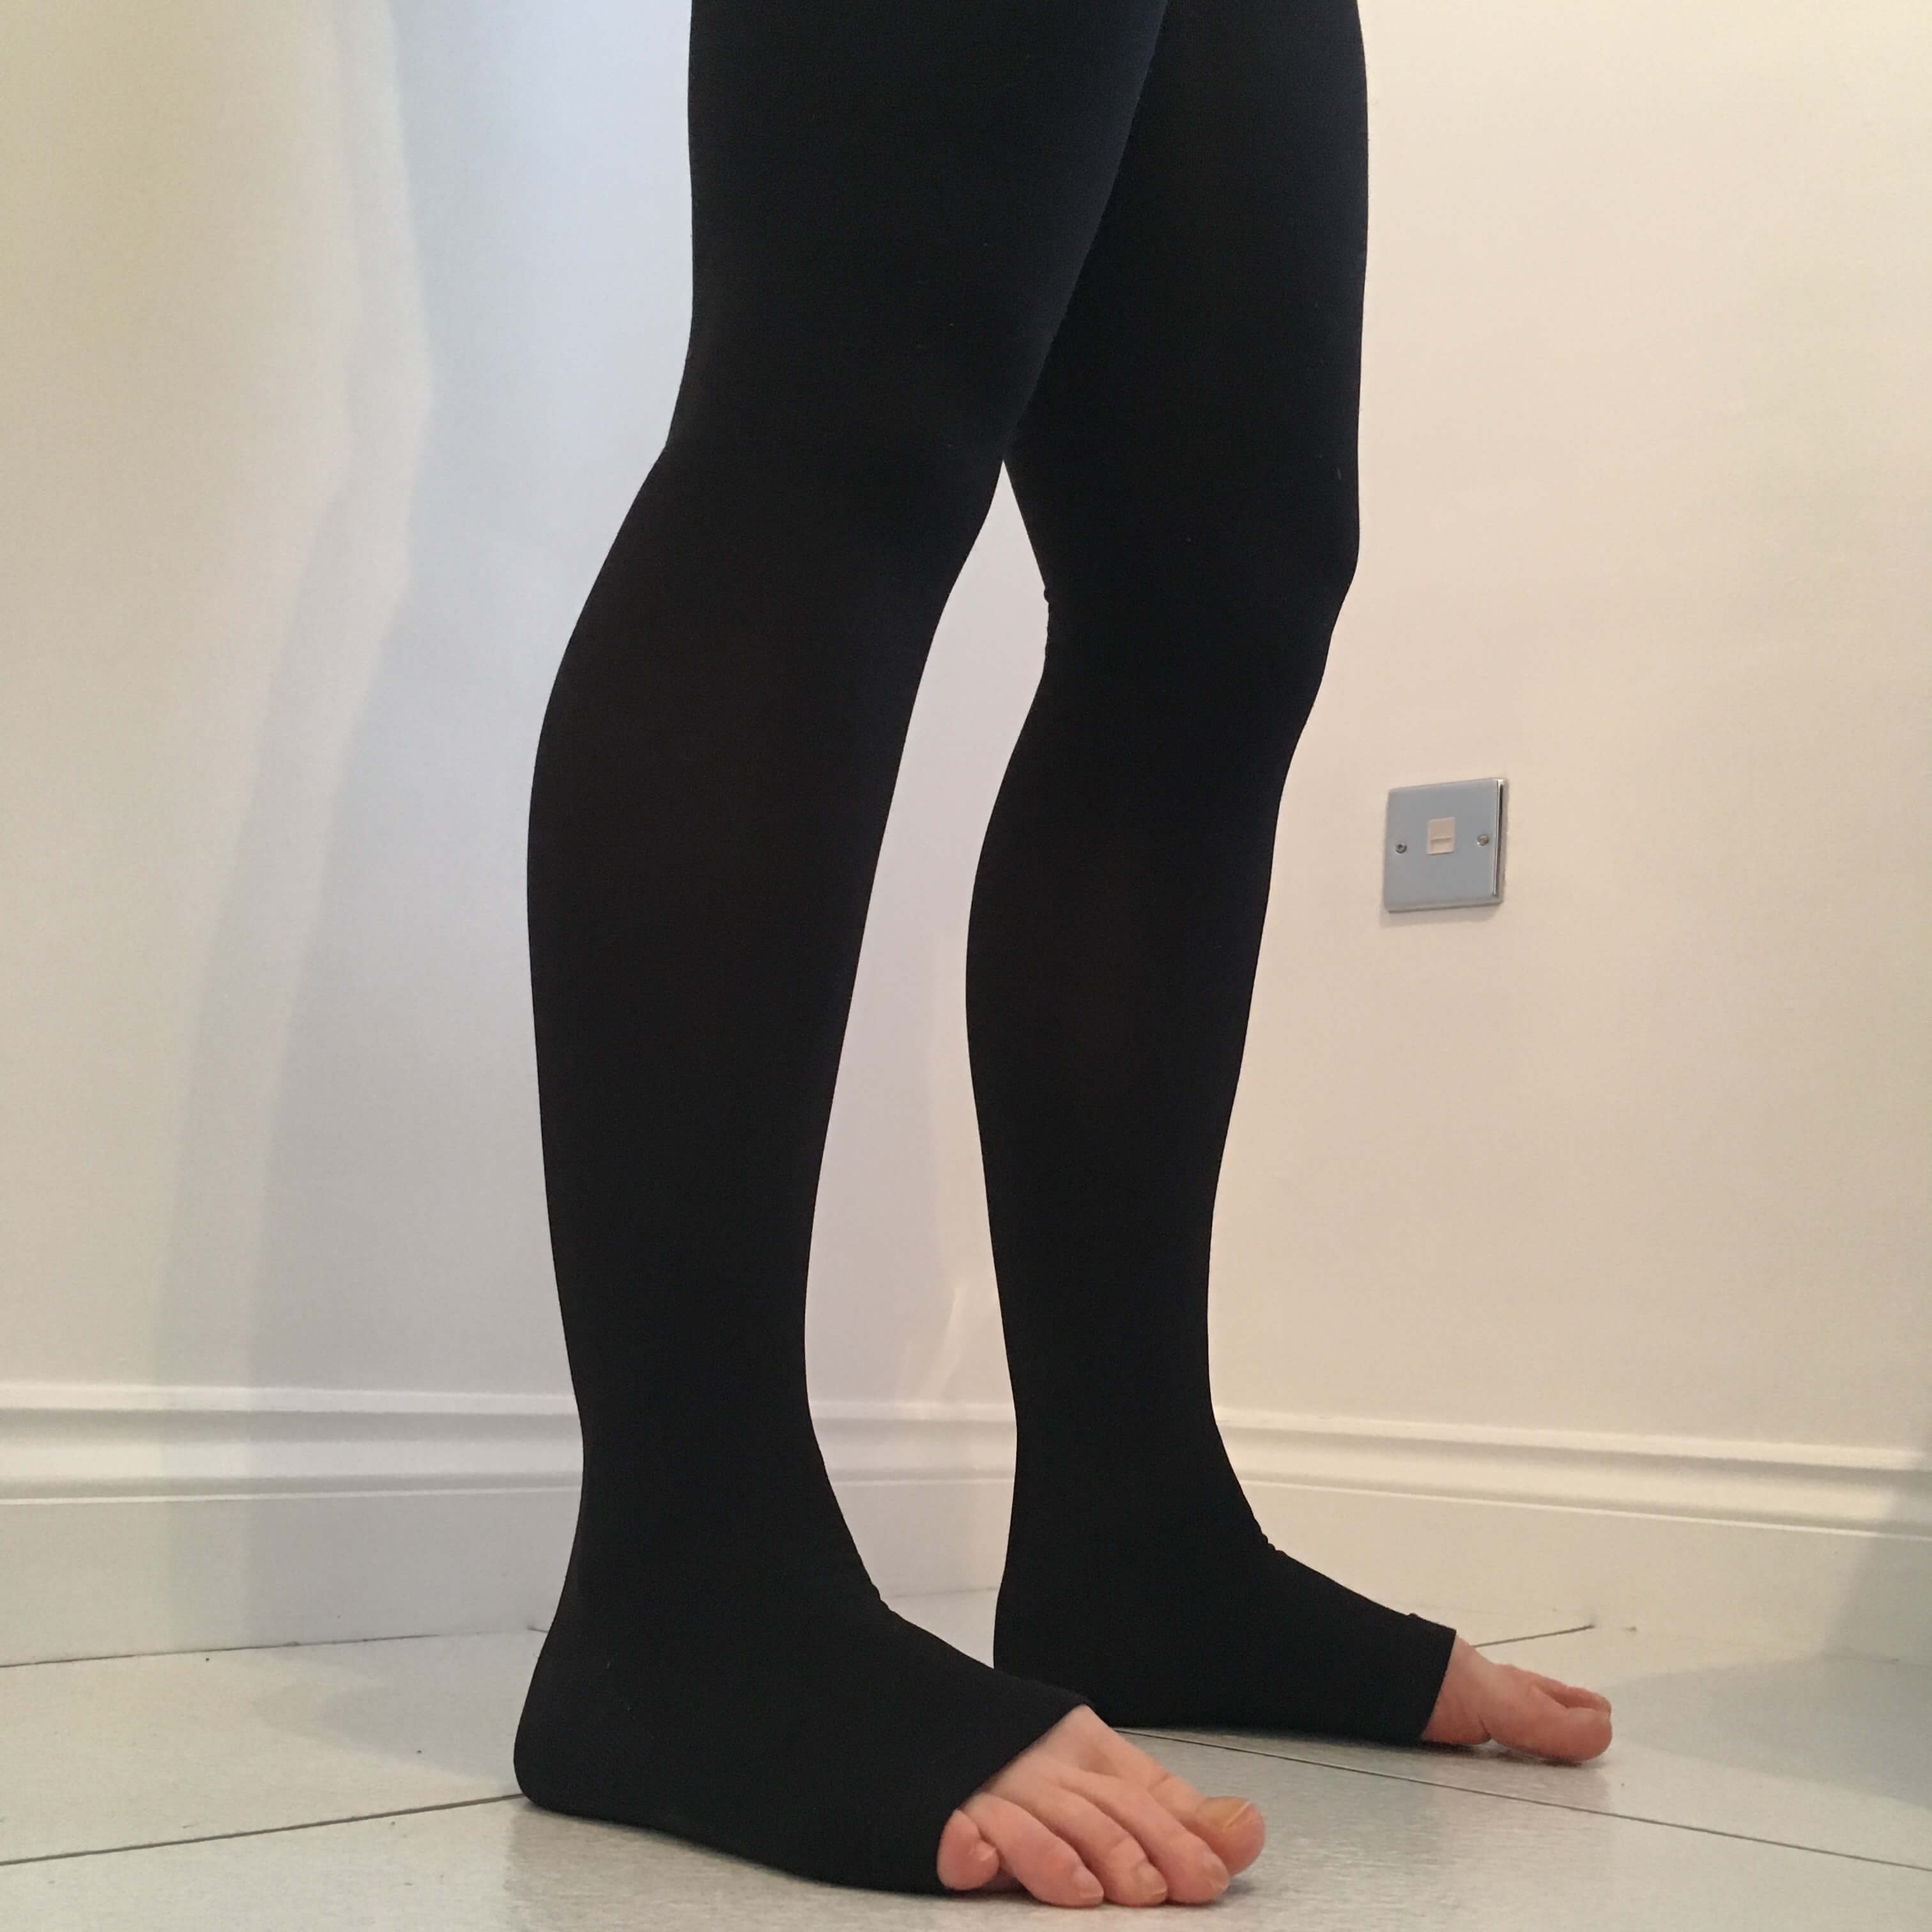 Compression leggings showing how they work